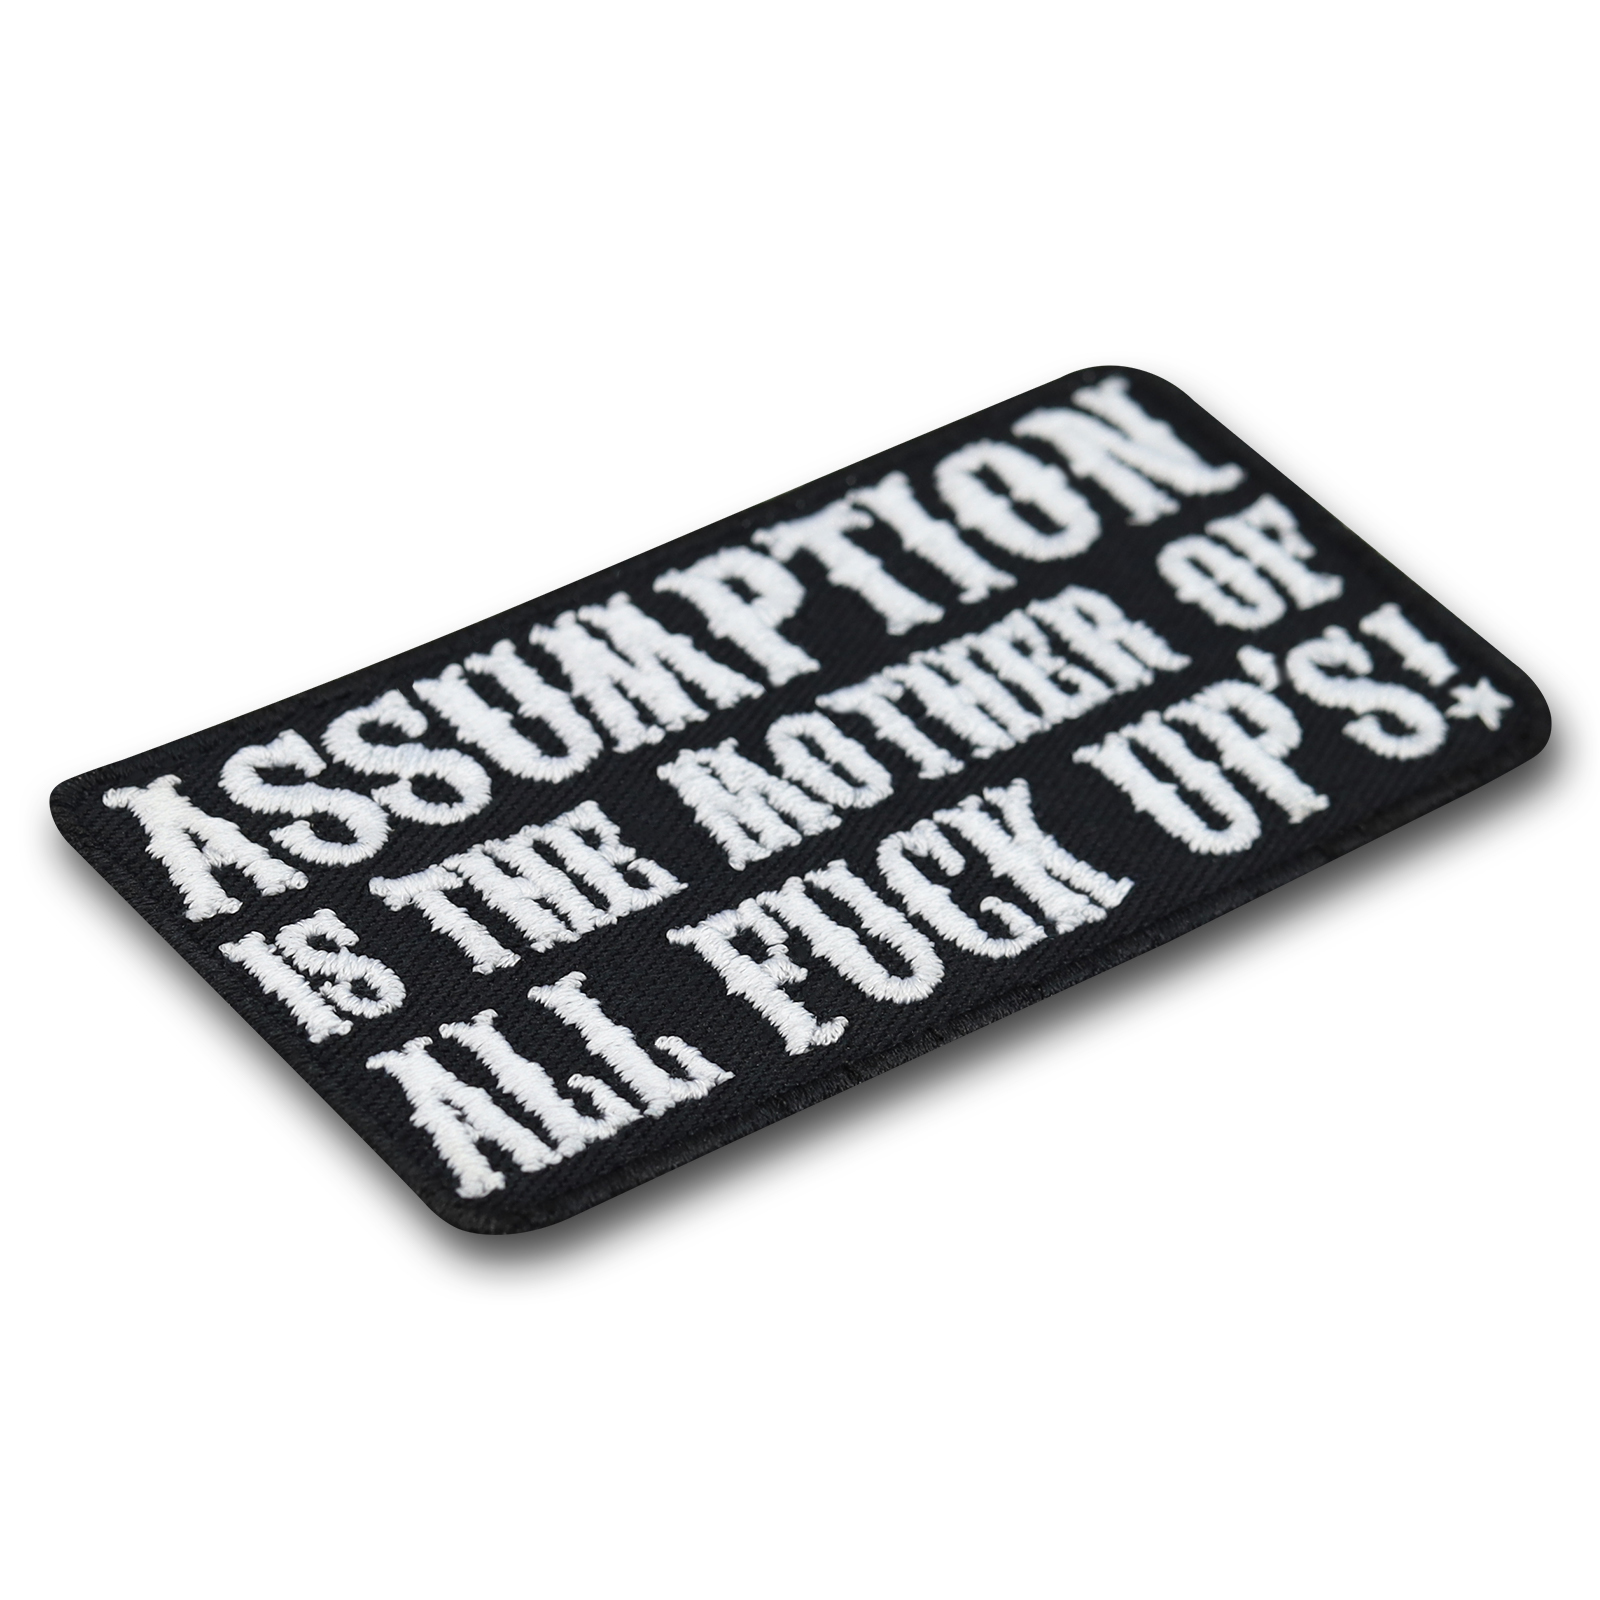 Assumption is the mother of all fuck up's! - Patch